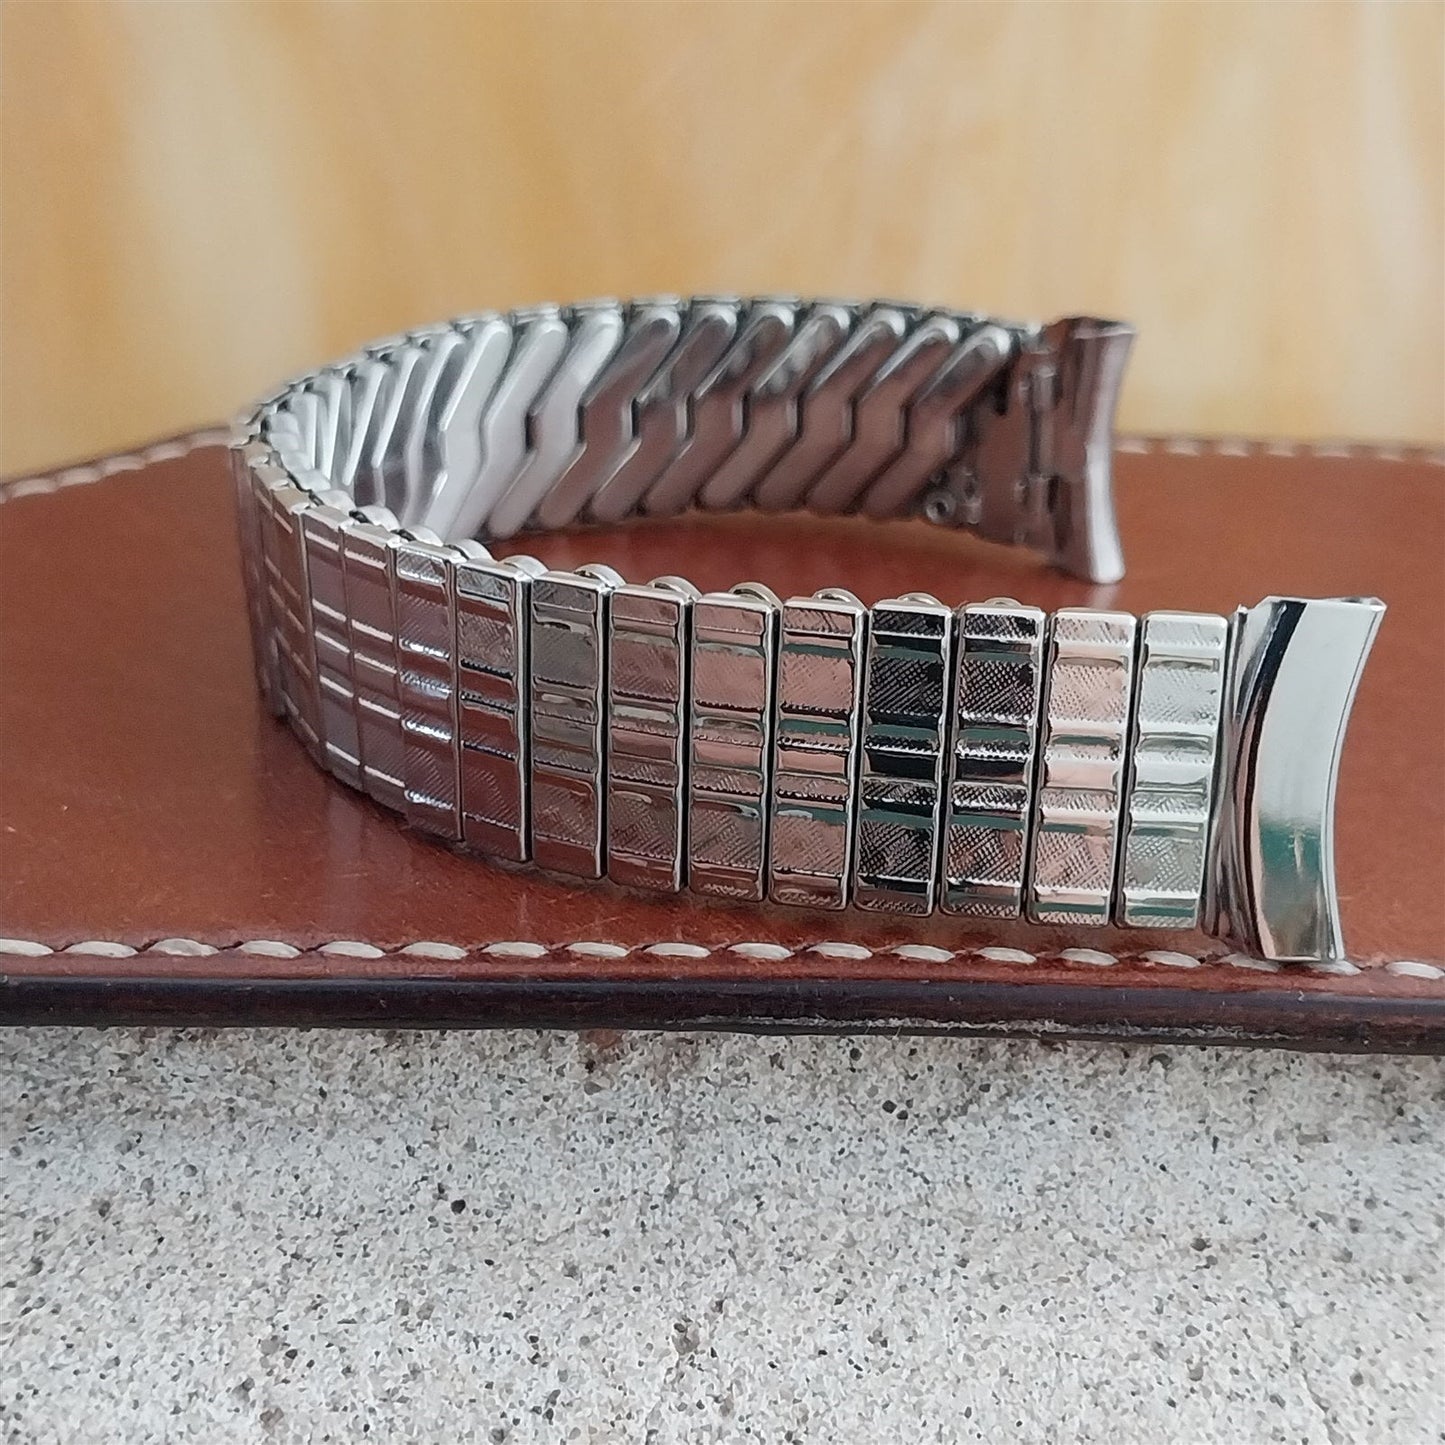 17mm 1950s-1960s Airflex Stainless Steel Classic Unused nos Vintage Watch Band